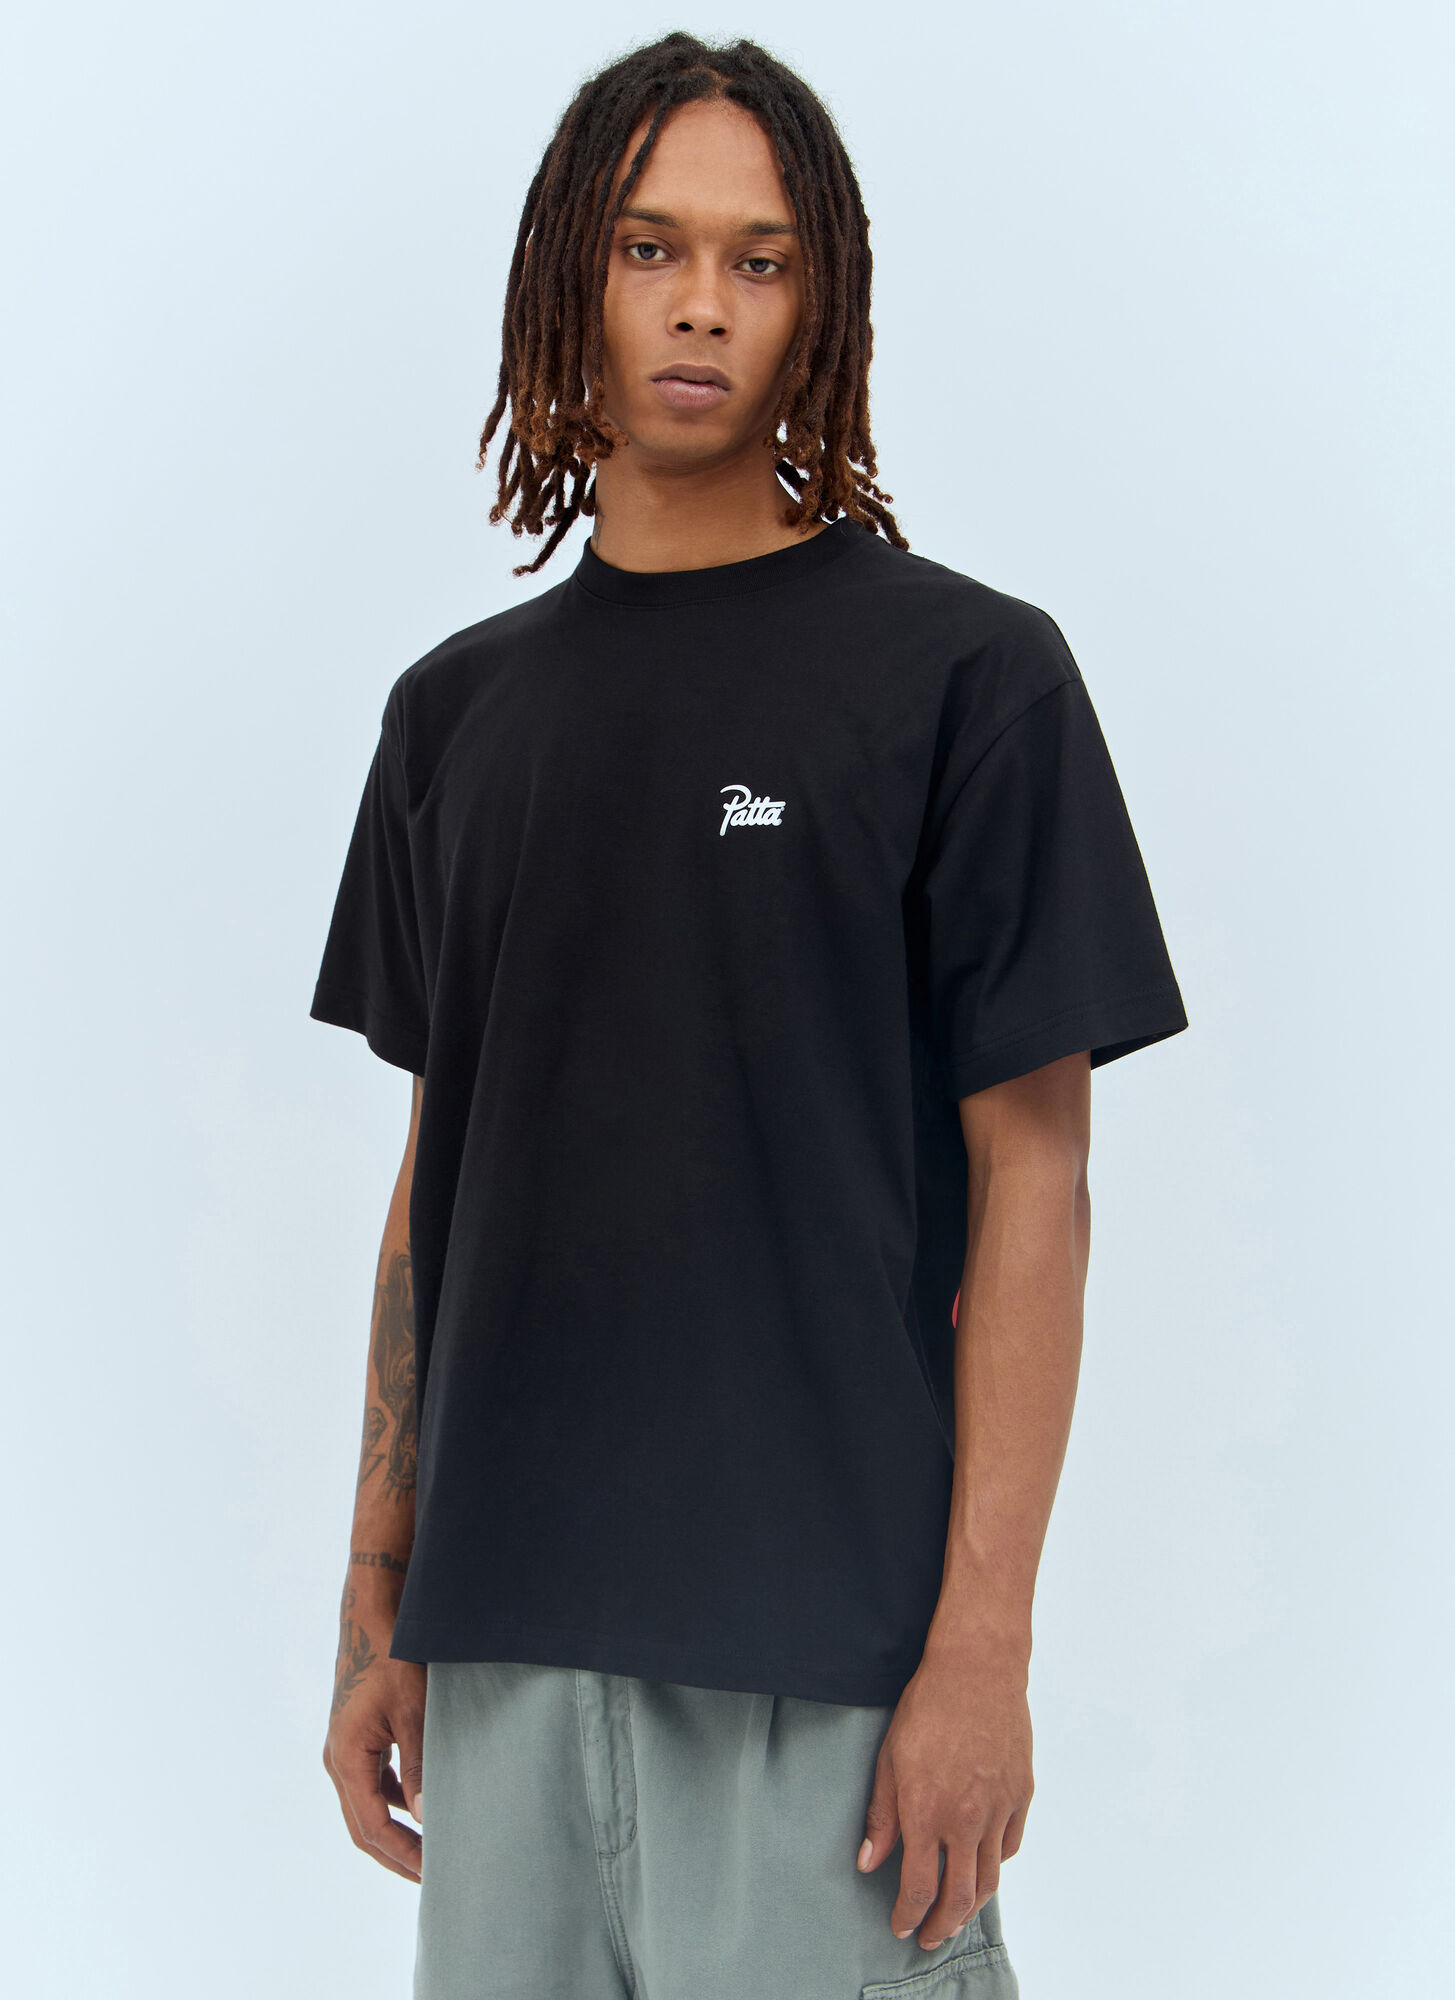 Patta Some Like It Hot T-shirt In Black